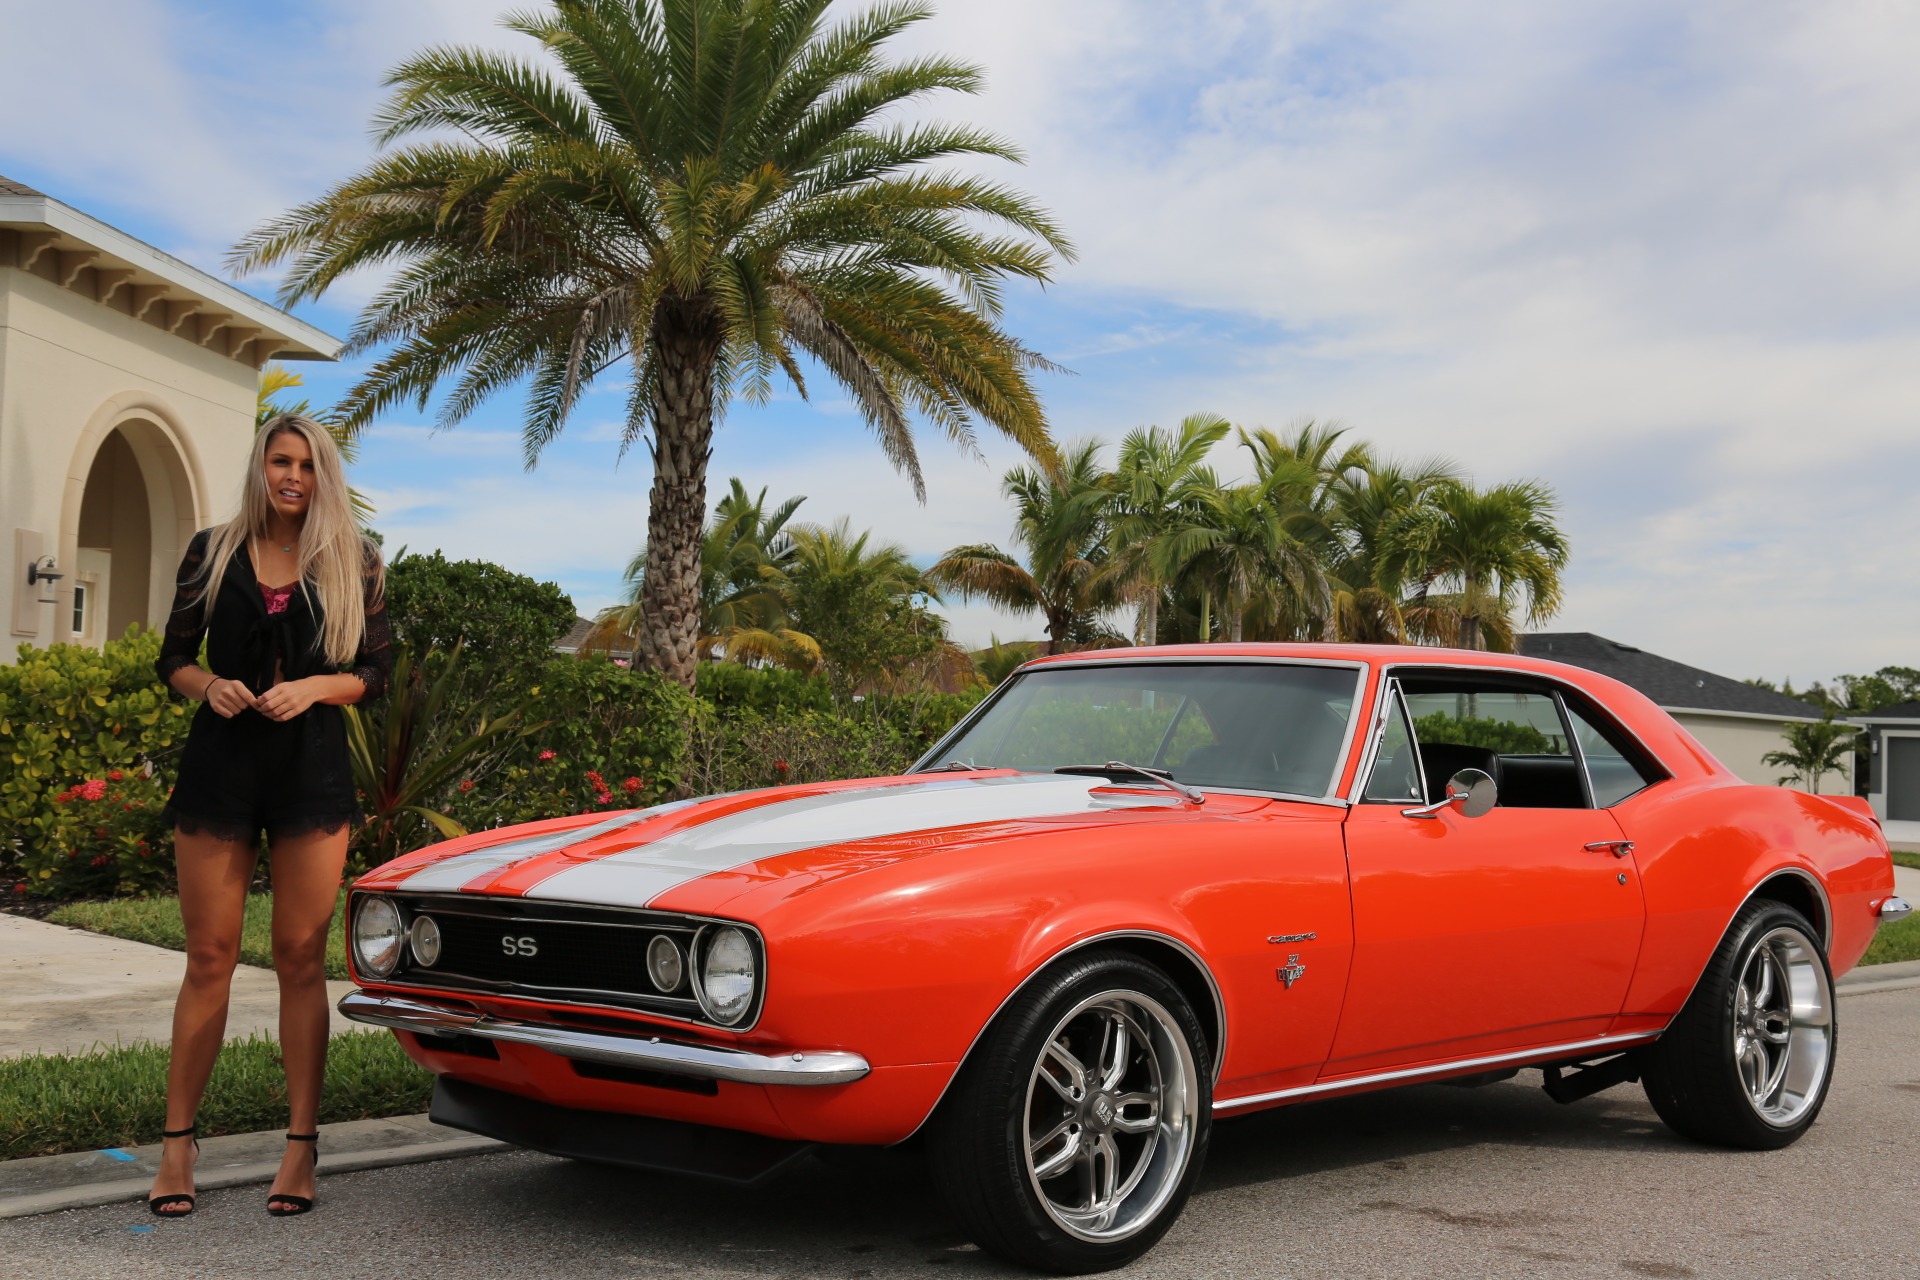 Used 1967 Chevy Camaro V8 Auto for sale Sold at Muscle Cars for Sale Inc. in Fort Myers FL 33912 4